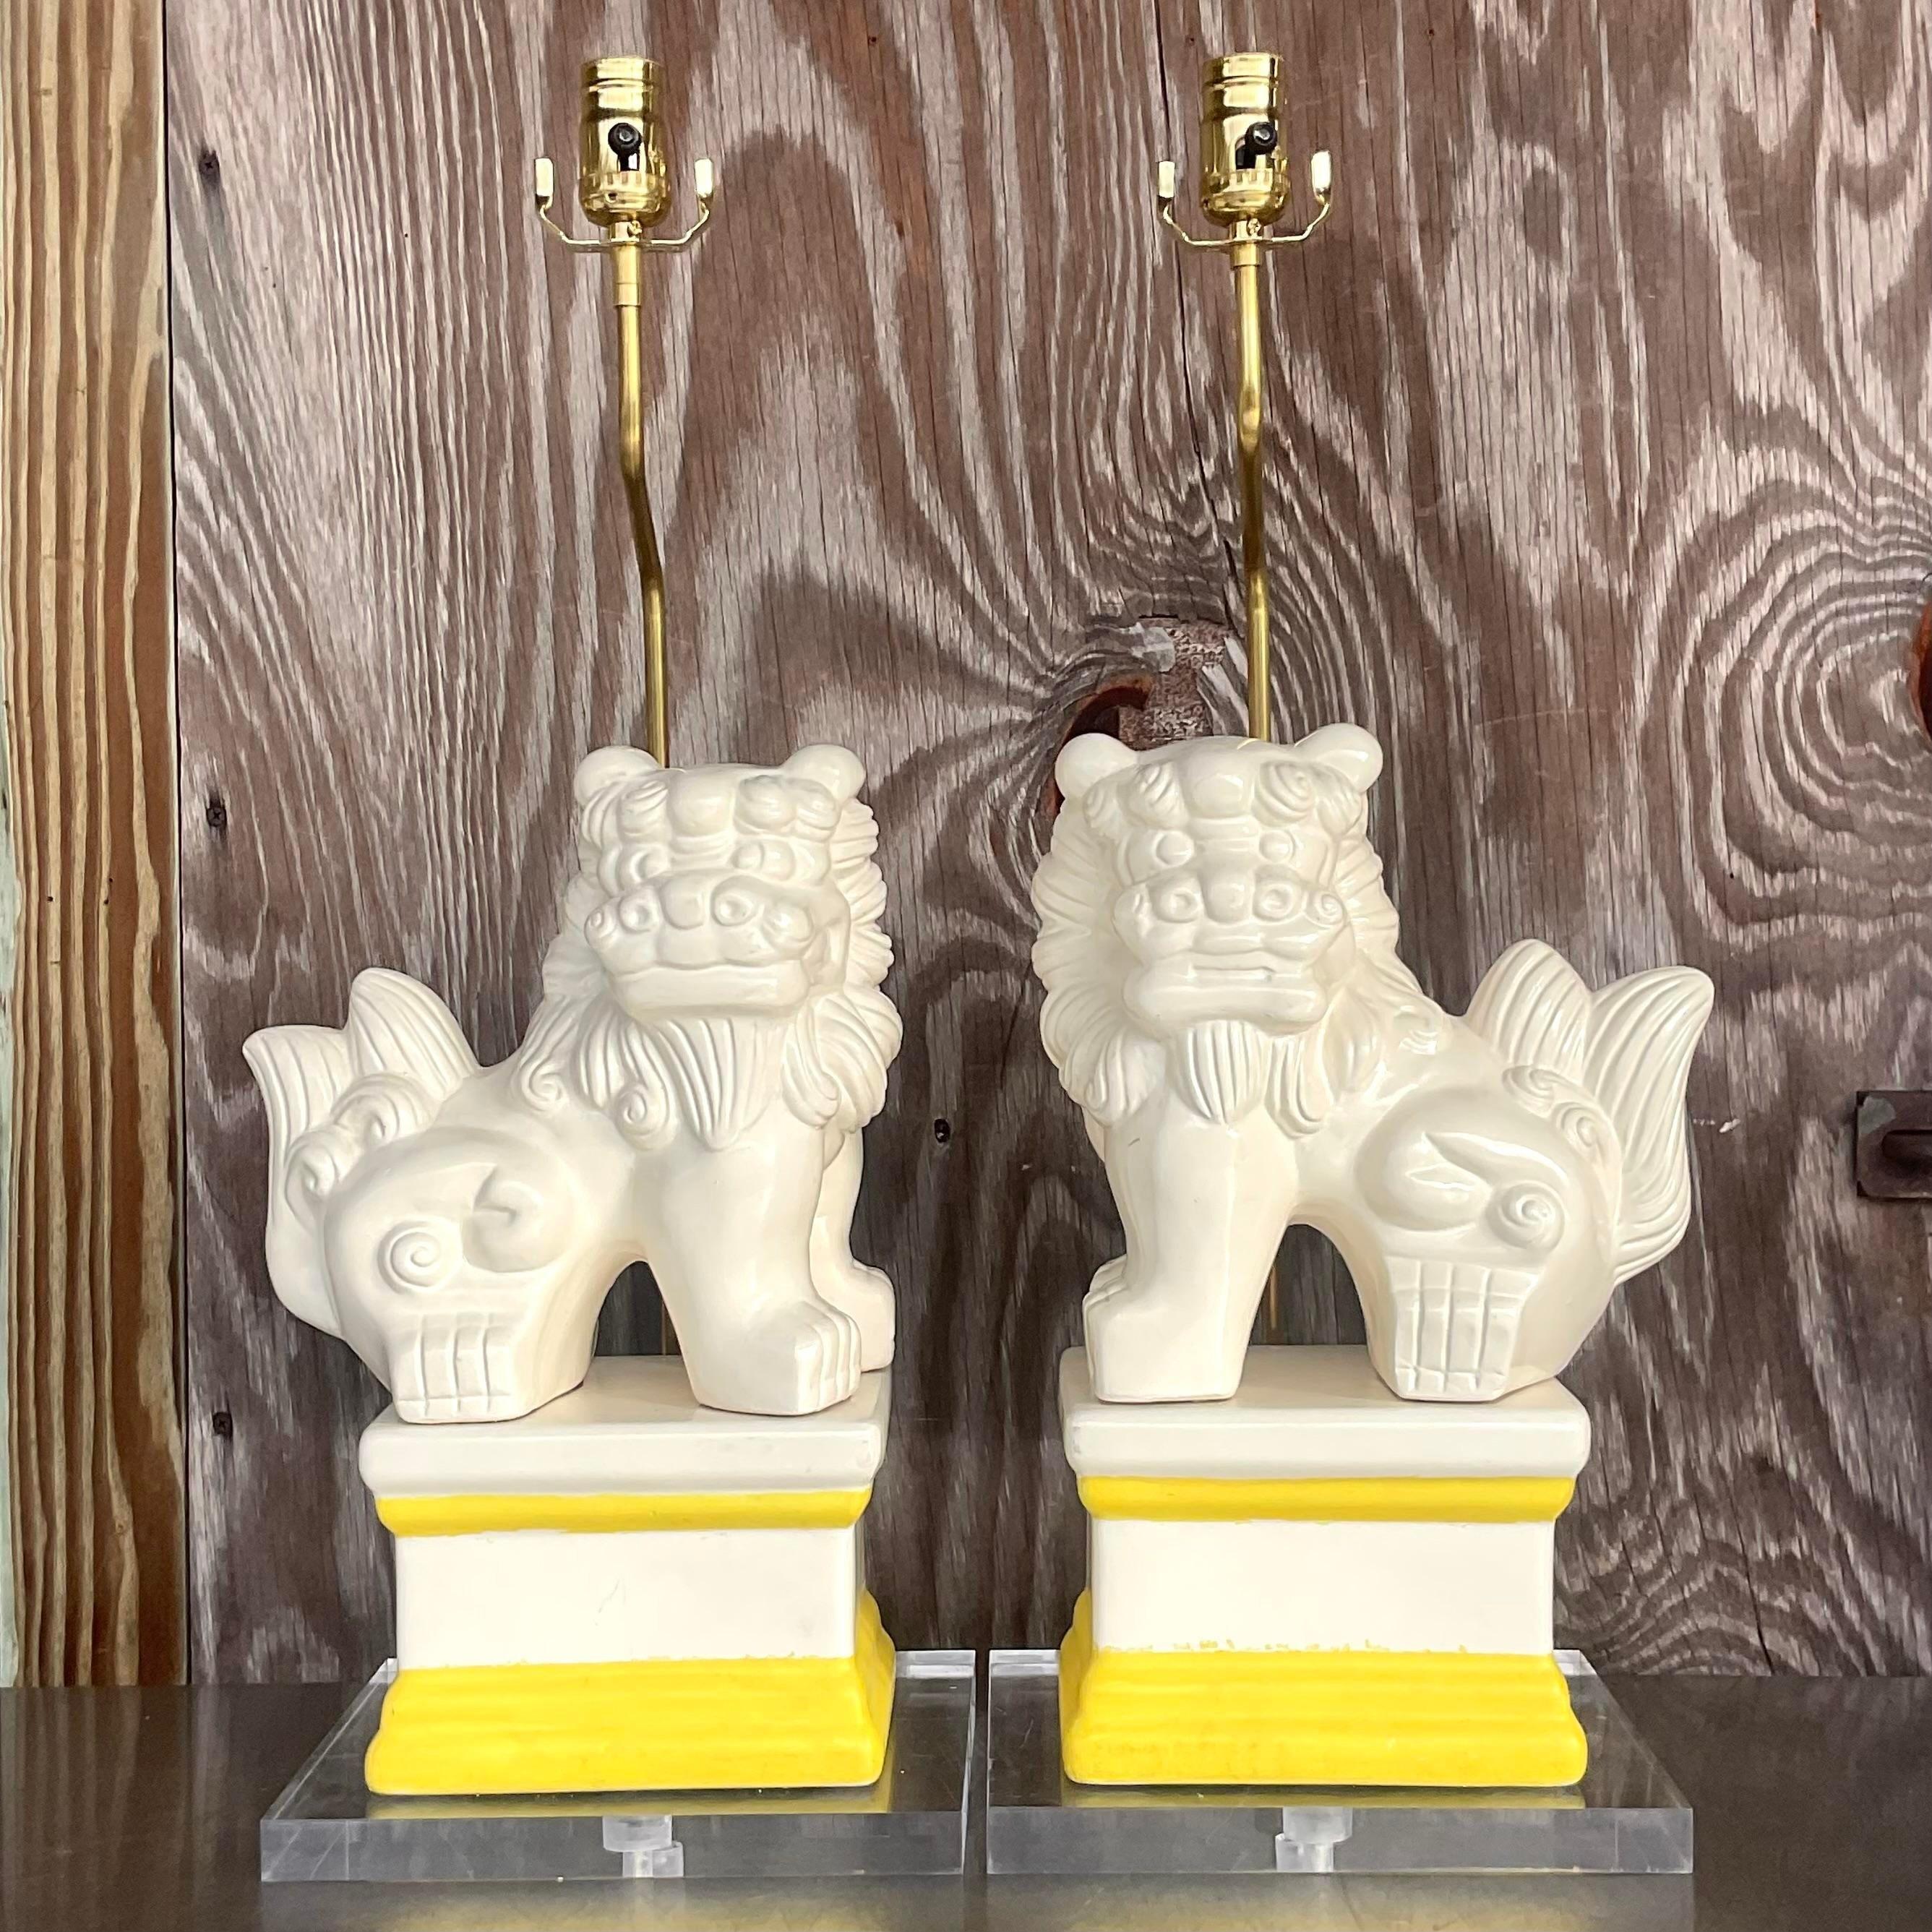 20th Century Vintage Asian Lacquered Foo Dog Lamps - a Pair For Sale